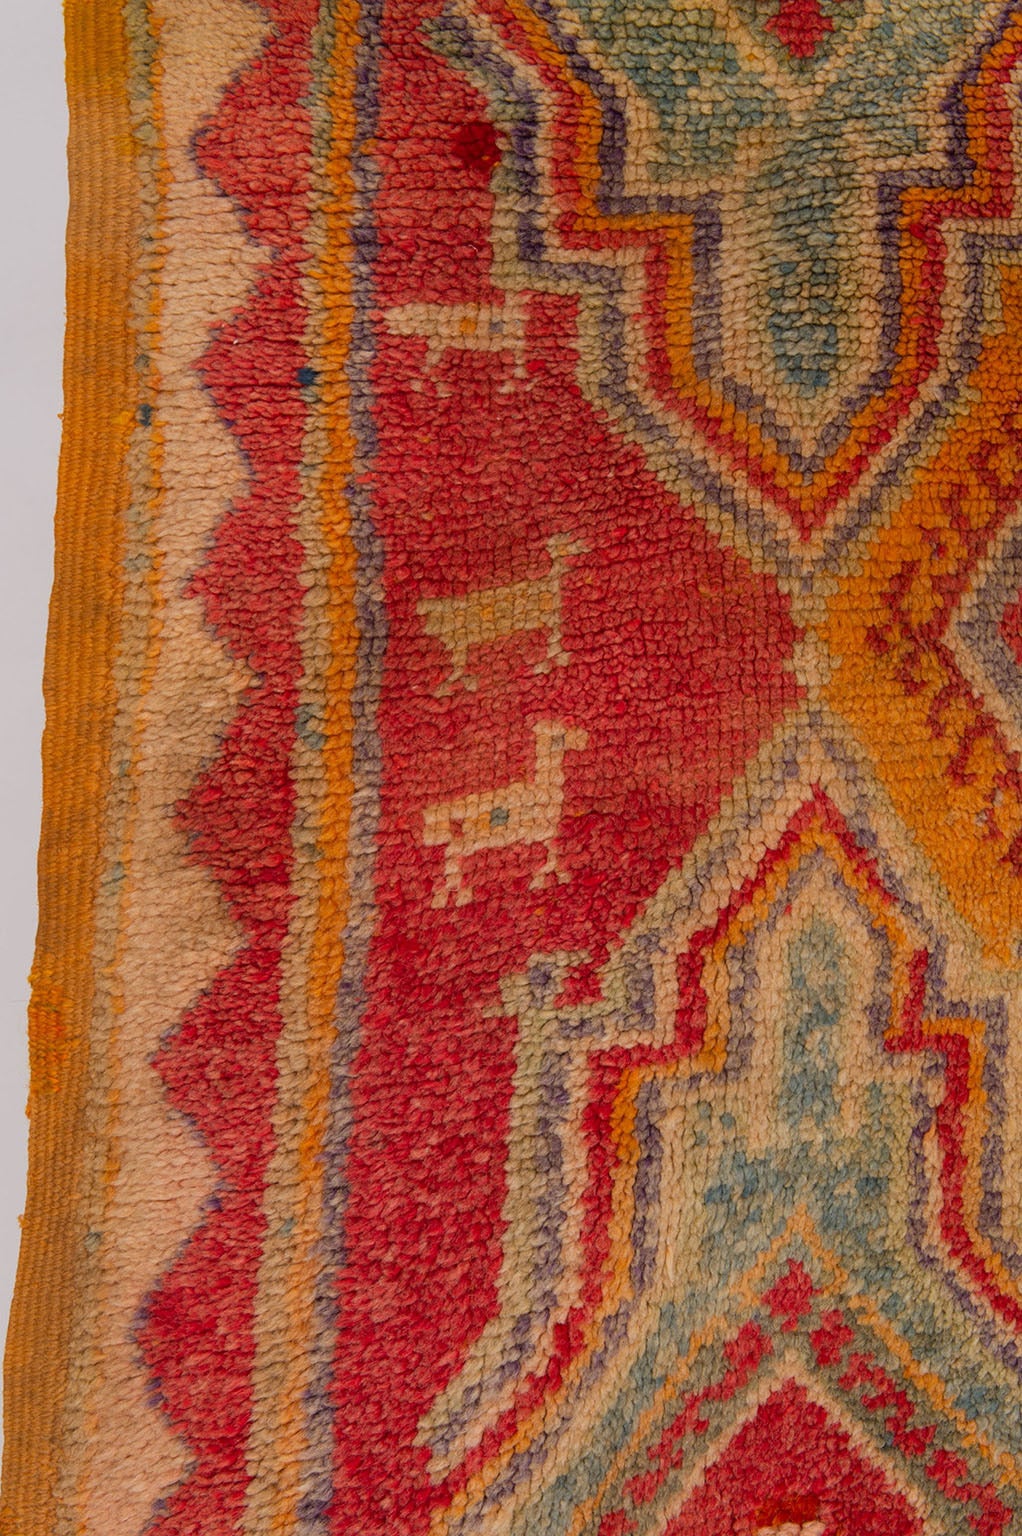 Ait Bougemmaz (Or Azilal) -
Some restorations on reverse.
All my Moroccan rugs have been shown in Italy under super vision of a Moroccan scholar charged by the Moroccan Government.
He was enthusiast and prepared an interesting exhibition with my